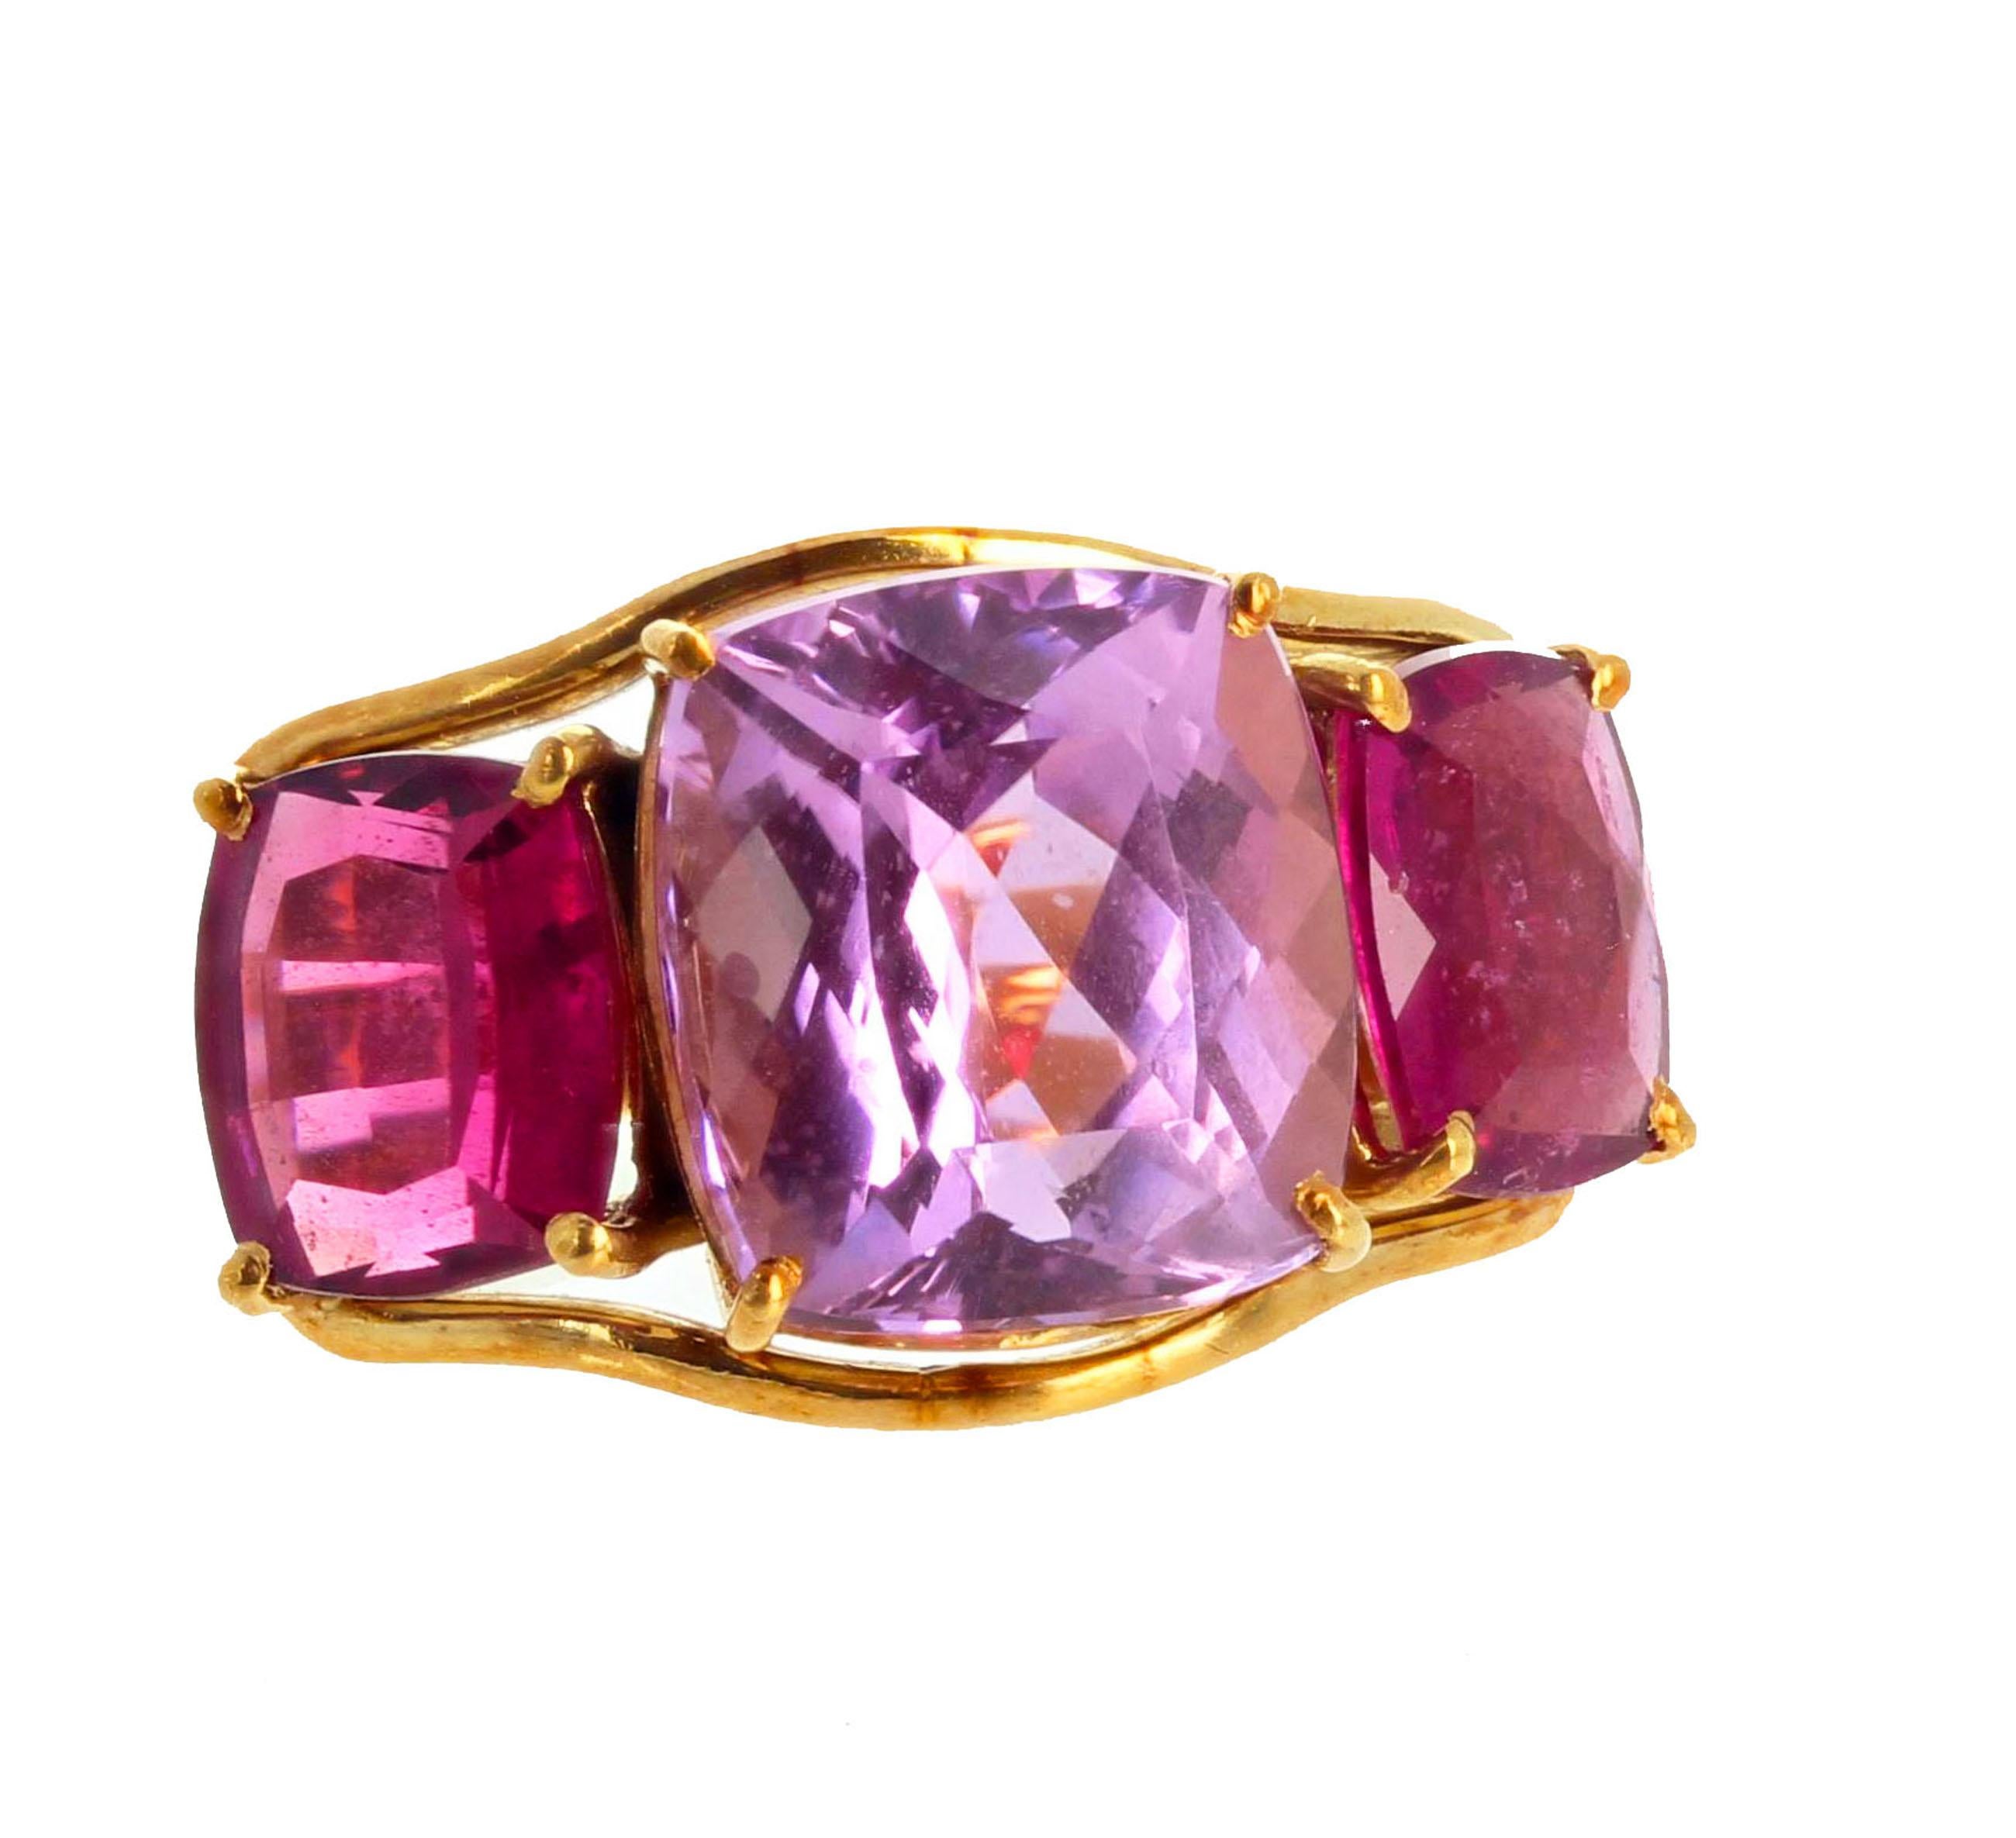 Glittering intense natural pink 8.85 carat Kunzite enhanced with 4.5 carats of pinky red natural Tourmalines set in 18kt yellow gold ring size 7 (sizable for free).  This is truly beautiful.